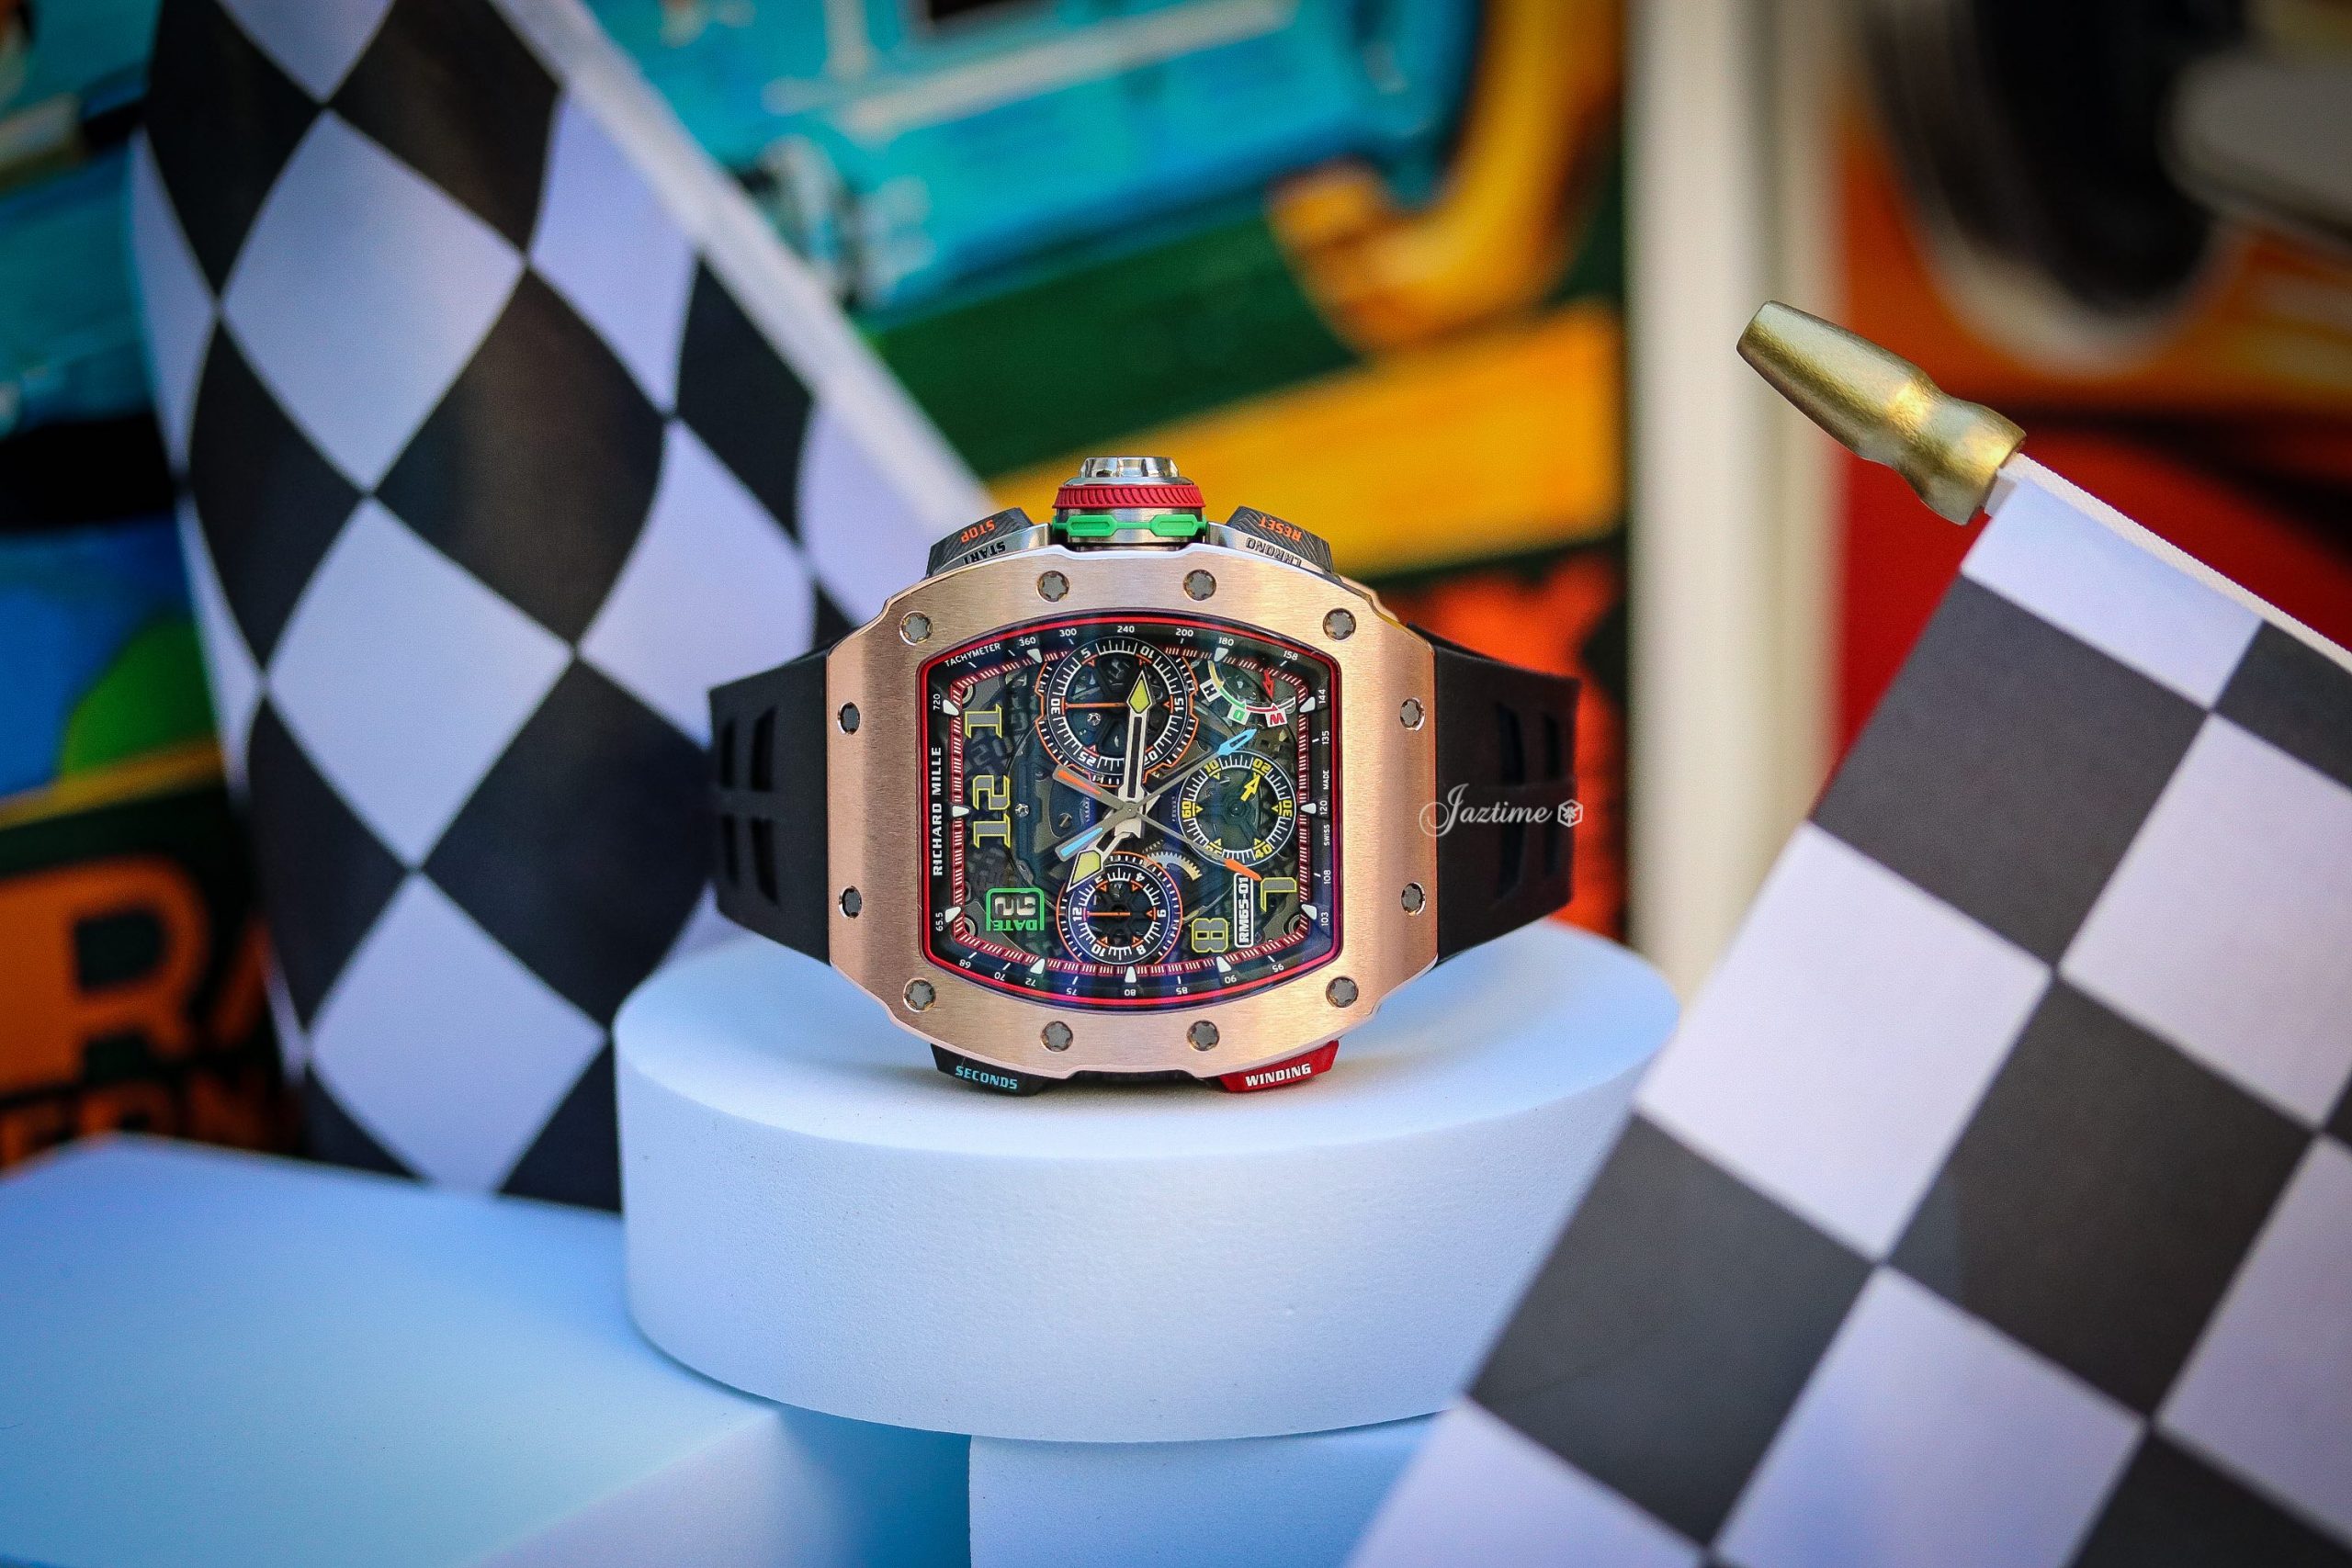 Richard Mille Automatic Winding Split-seconds Chronograph Rose Gold RM 65-01 - Jaztime Blog - New & Used Luxury Watches - Orange County - CA-4